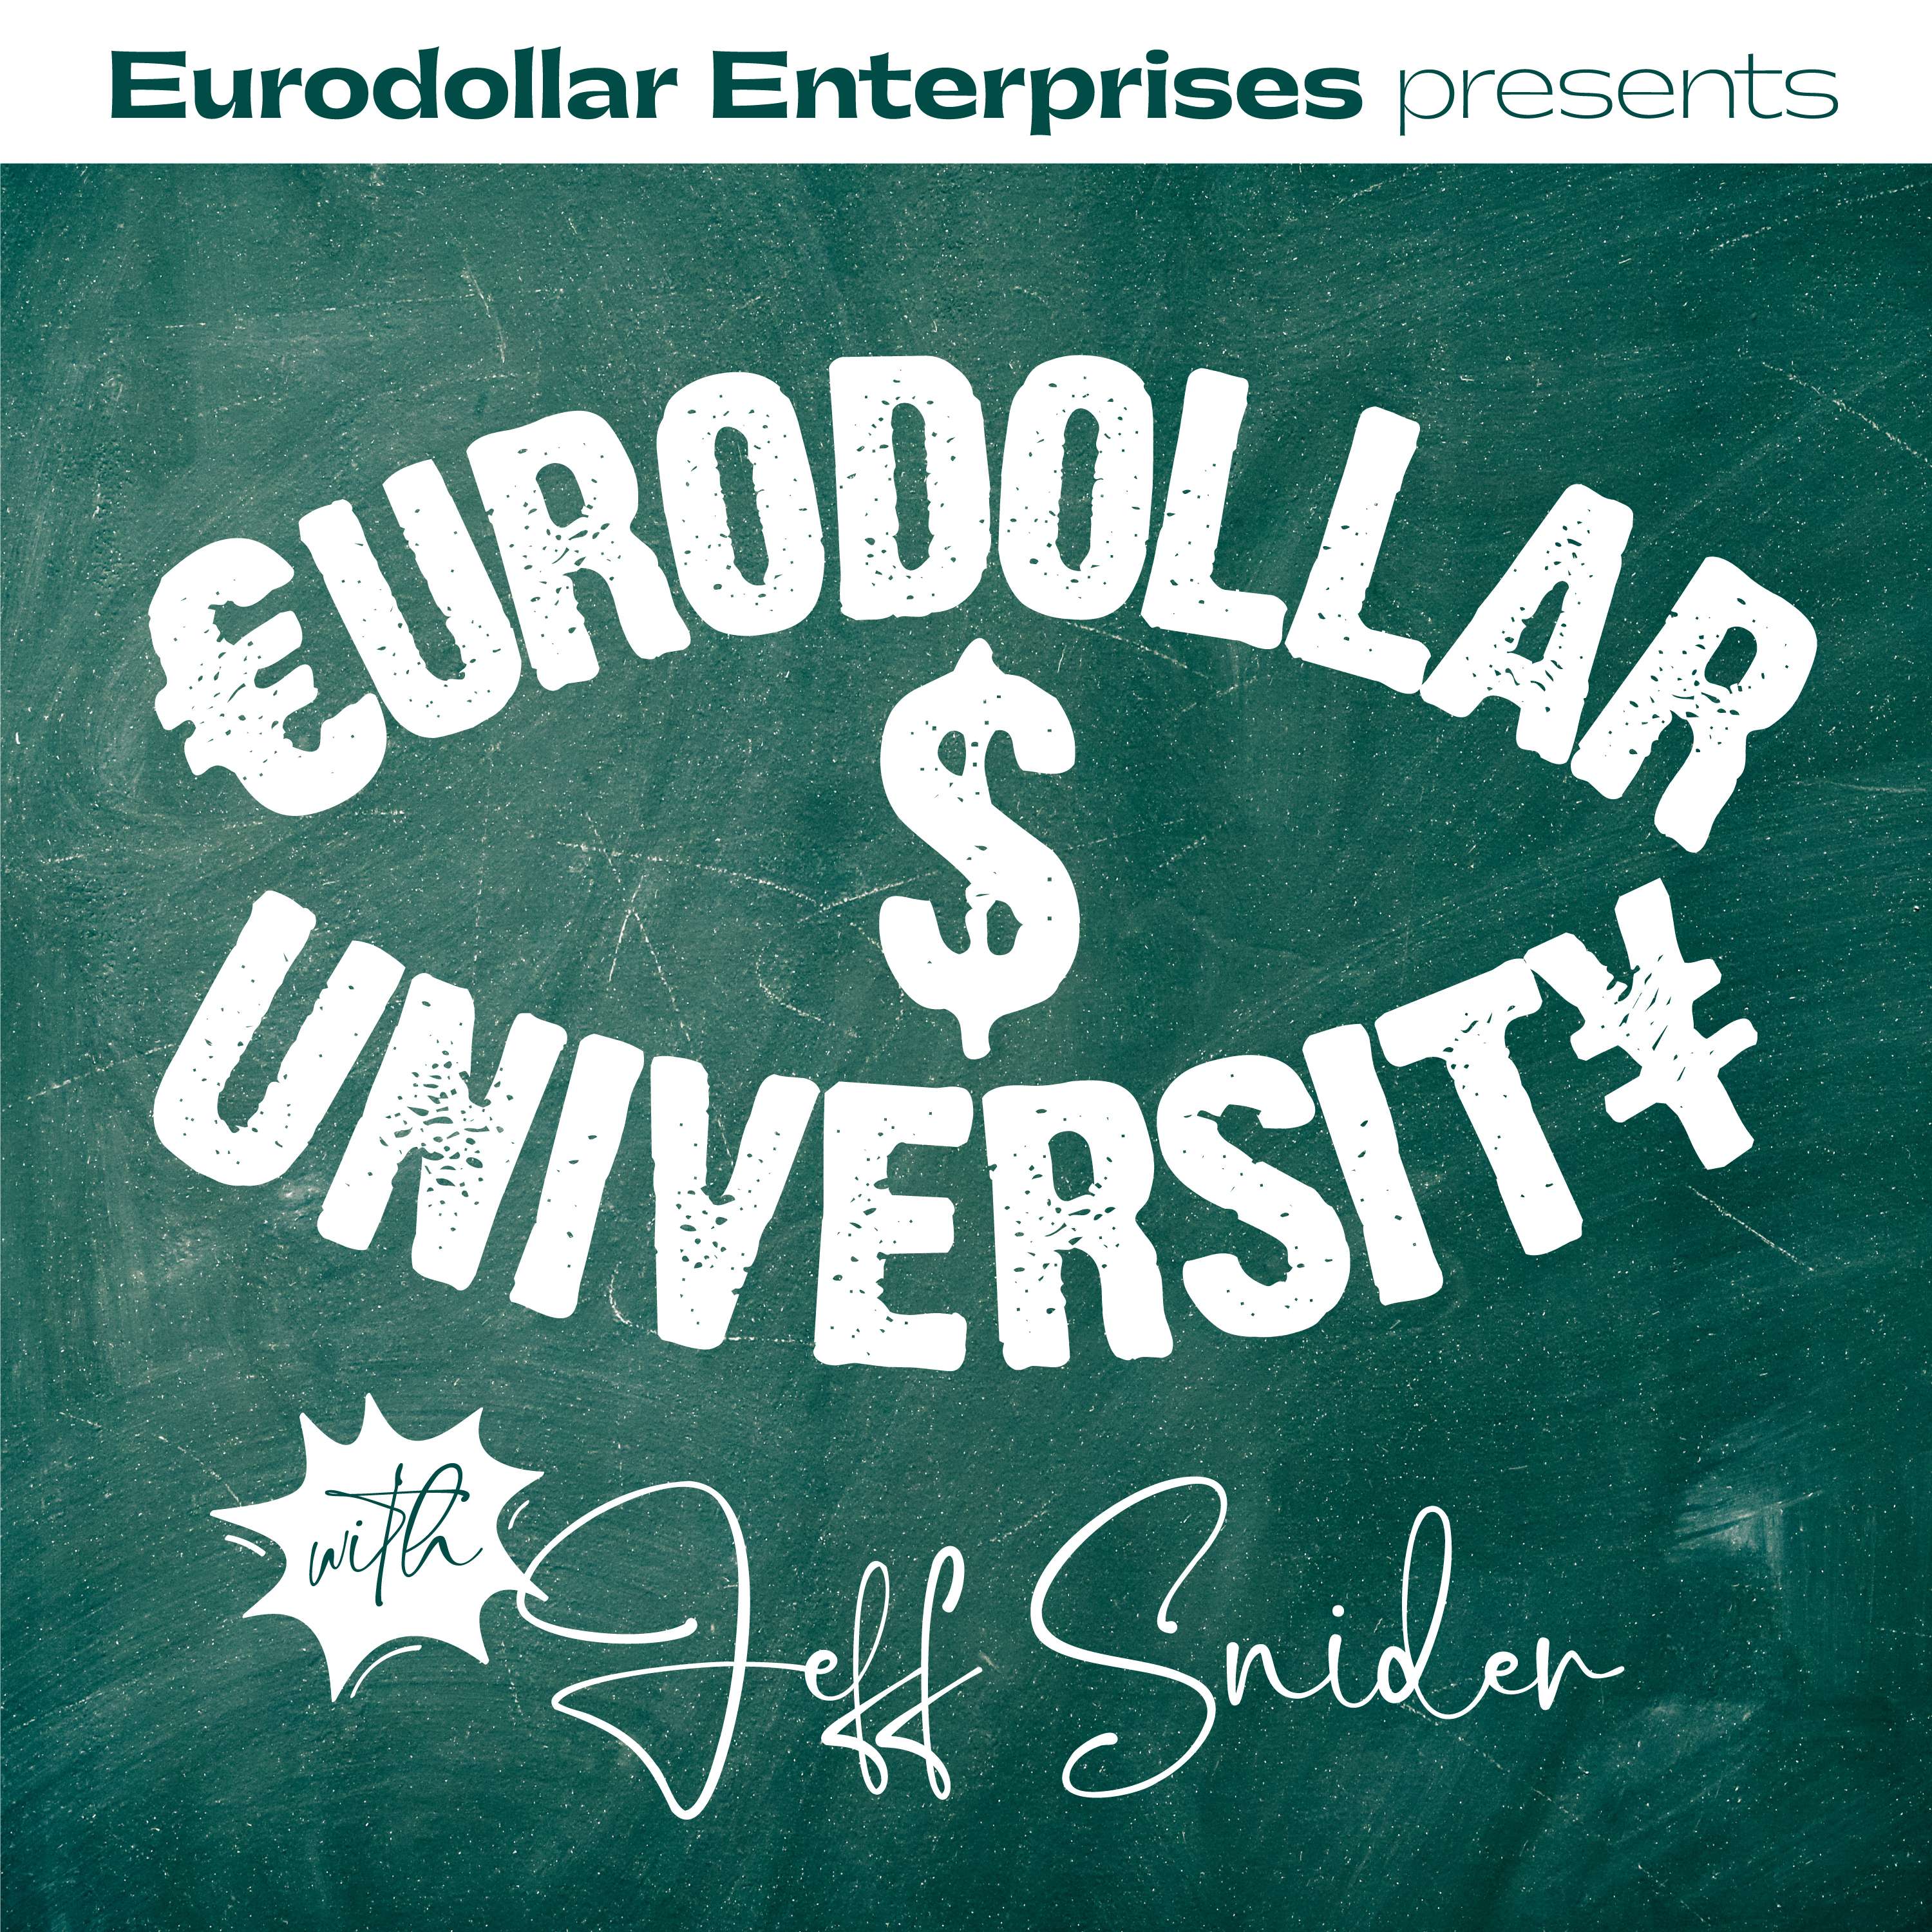 China Stimulus! (I Do Not Think It Means What You Think It Means) [Eurodollar University, Ep. 231]